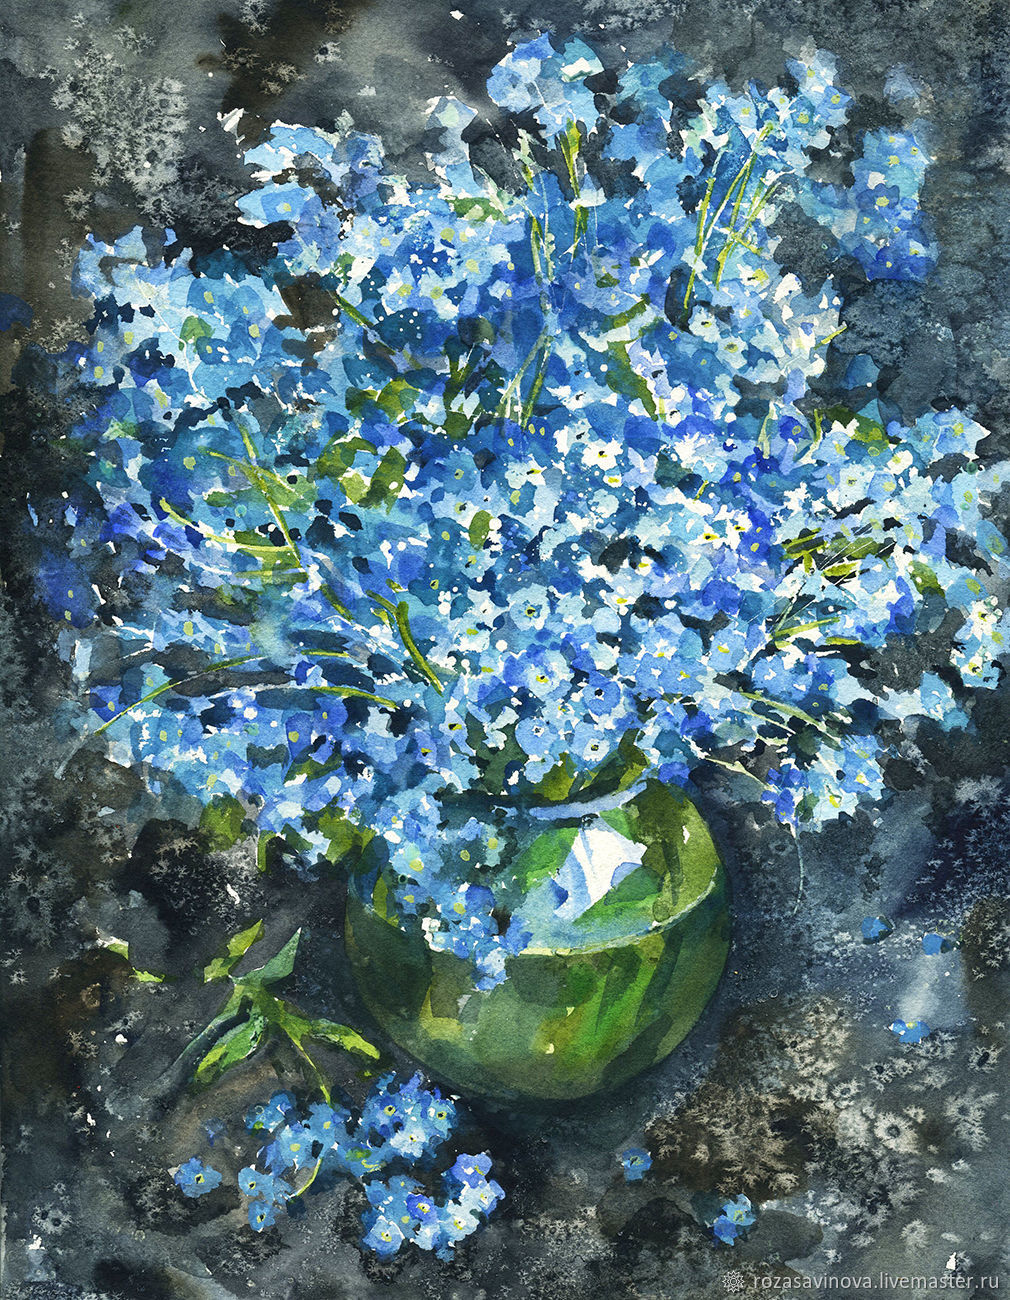 Forget-me-not Original Watercolor Painting Still life Small Flowers art Wall decor Pitcher with flowers painting Folk art Cottage decor